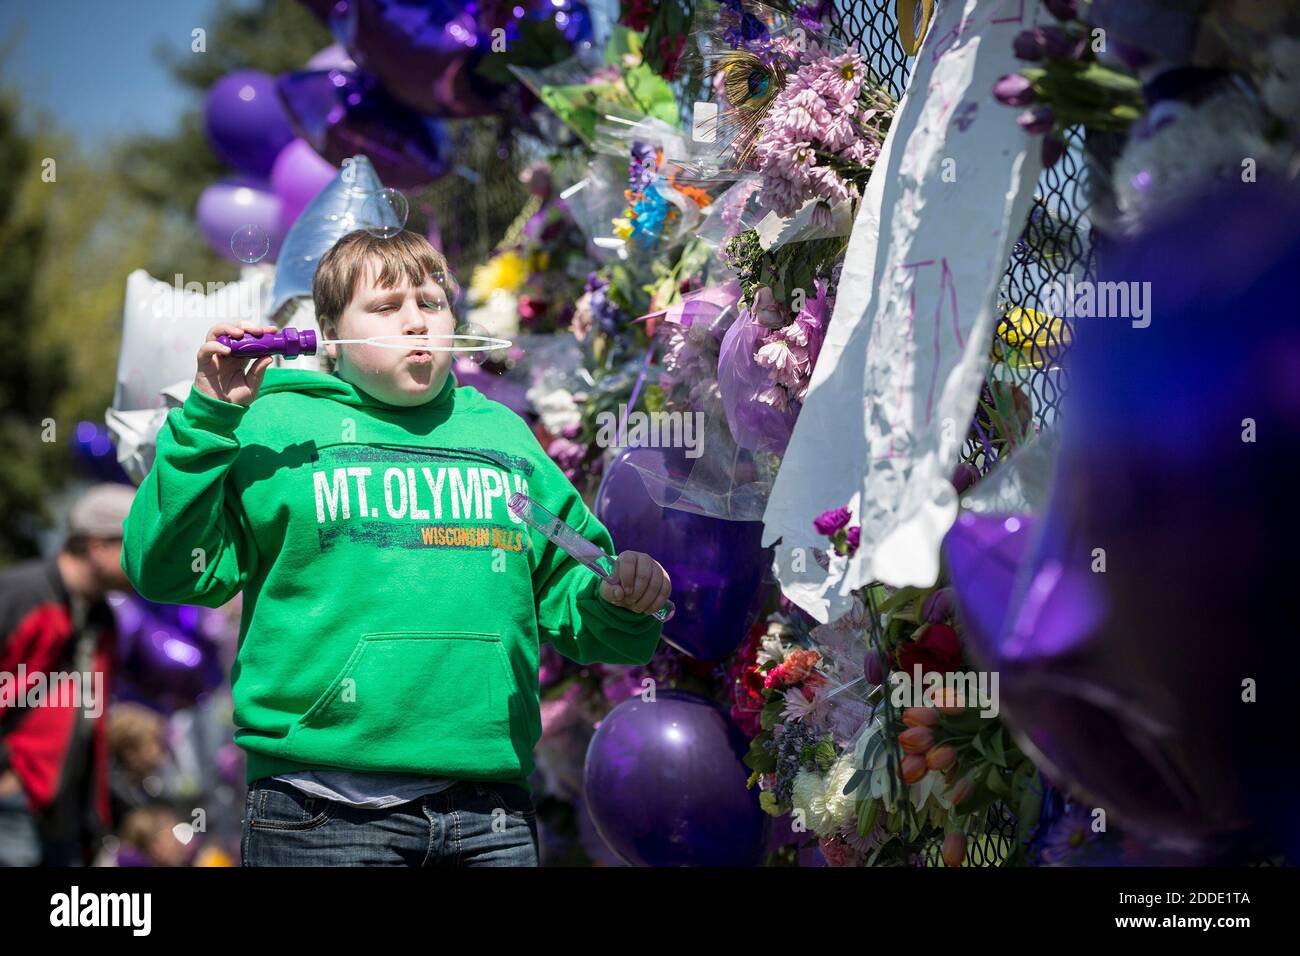 NO FILM, NO VIDEO, NO TV, NO DOCUMENTARY - Seth Berner, 10, of Buffalo,  N.Y., blows bubbles from a purple bubble set outside Prince's house at  Paisley Park on Friday, April 22,